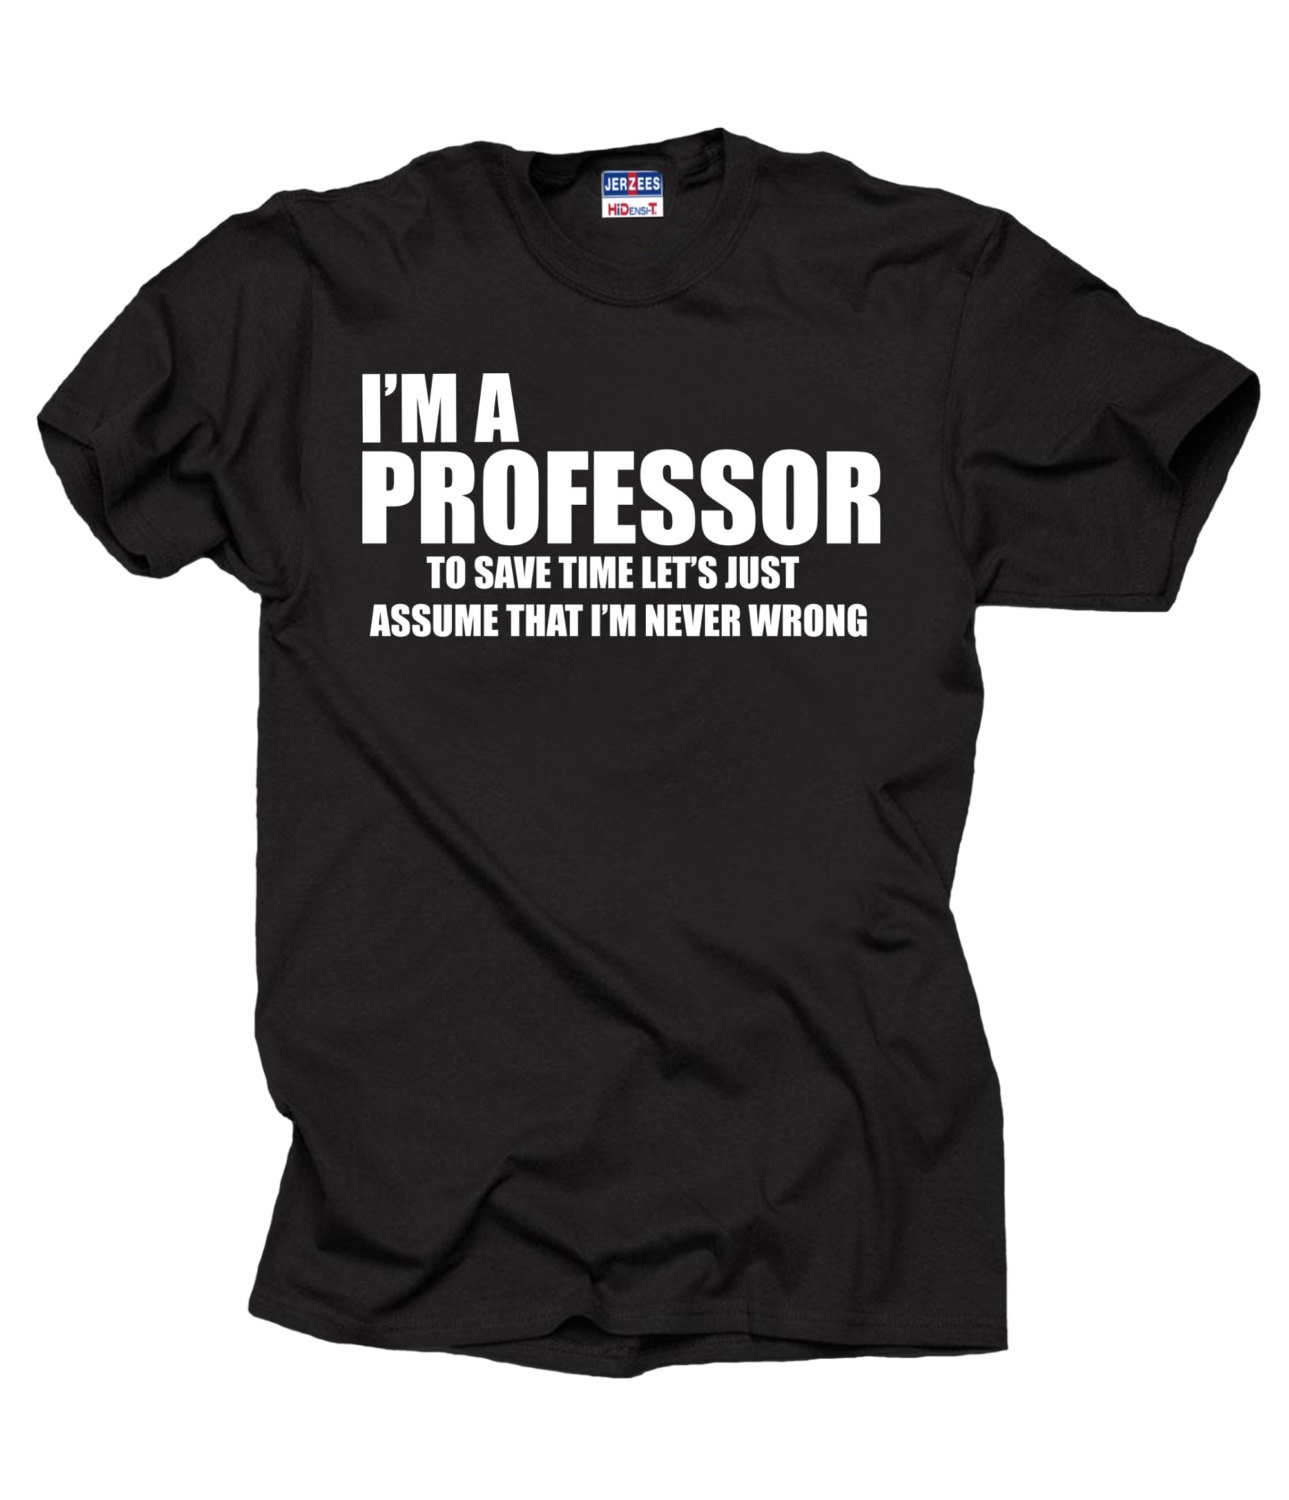 Funny Statement Shirt for a Cool Professor